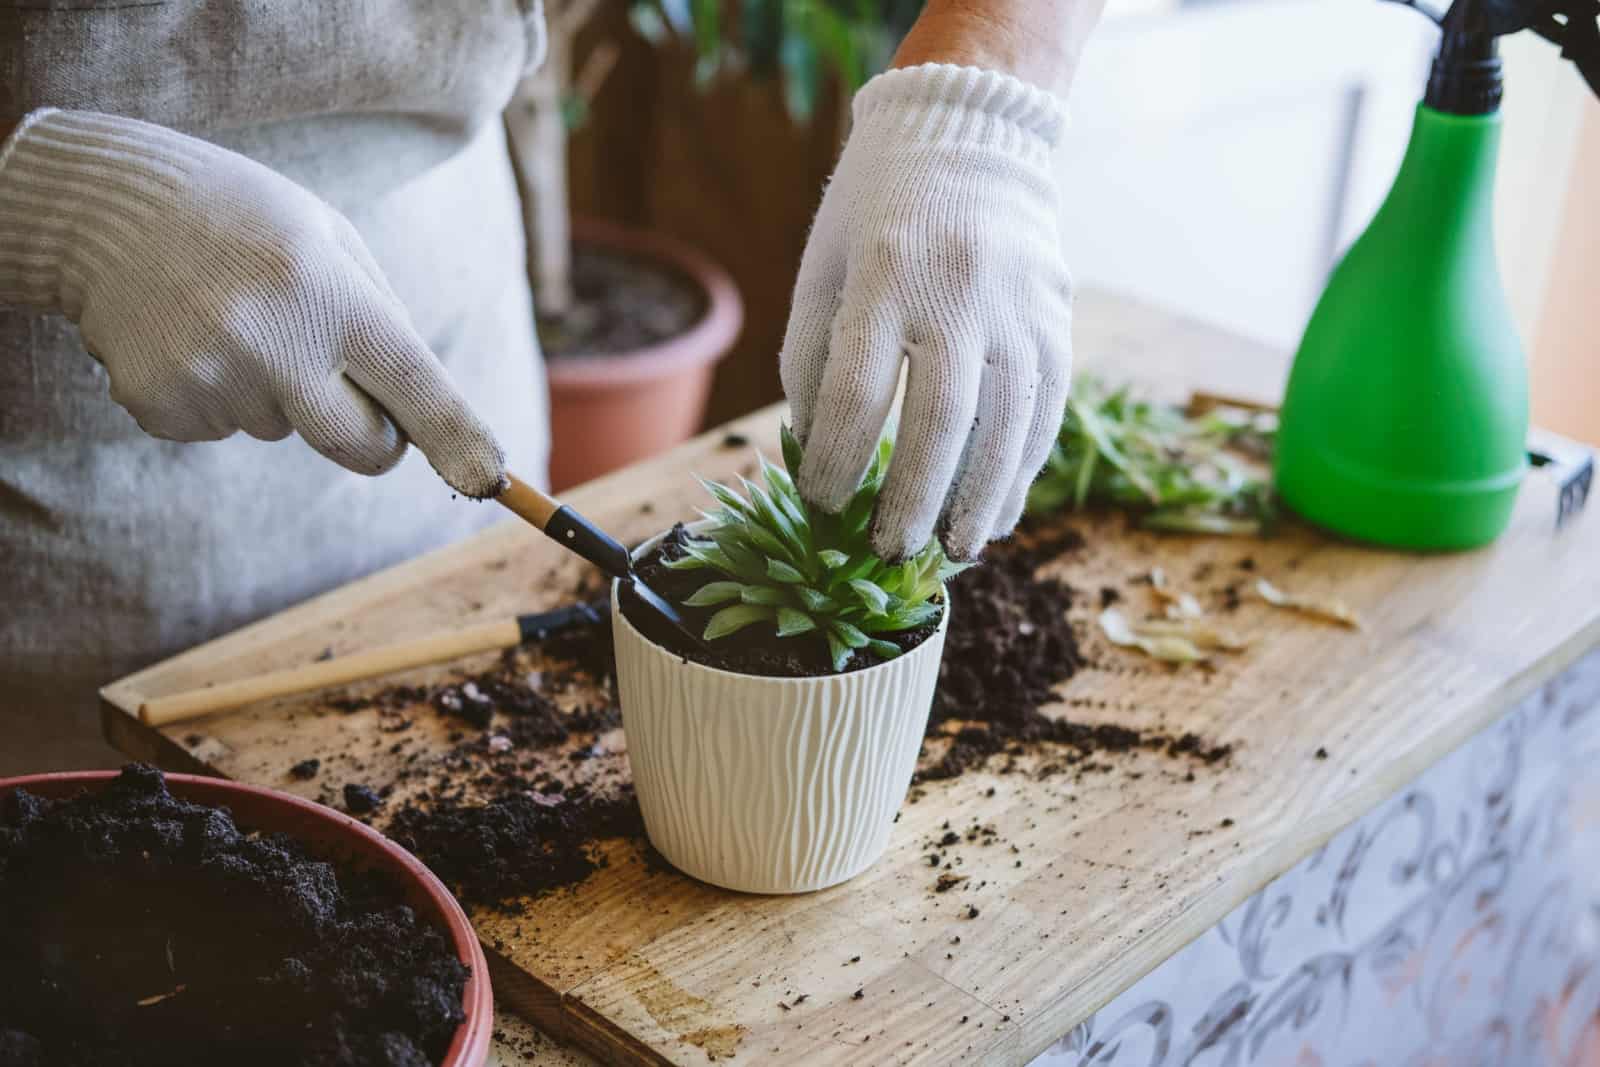 Woman gardeners hand transplanting cacti and succulents in pots on the wooden table